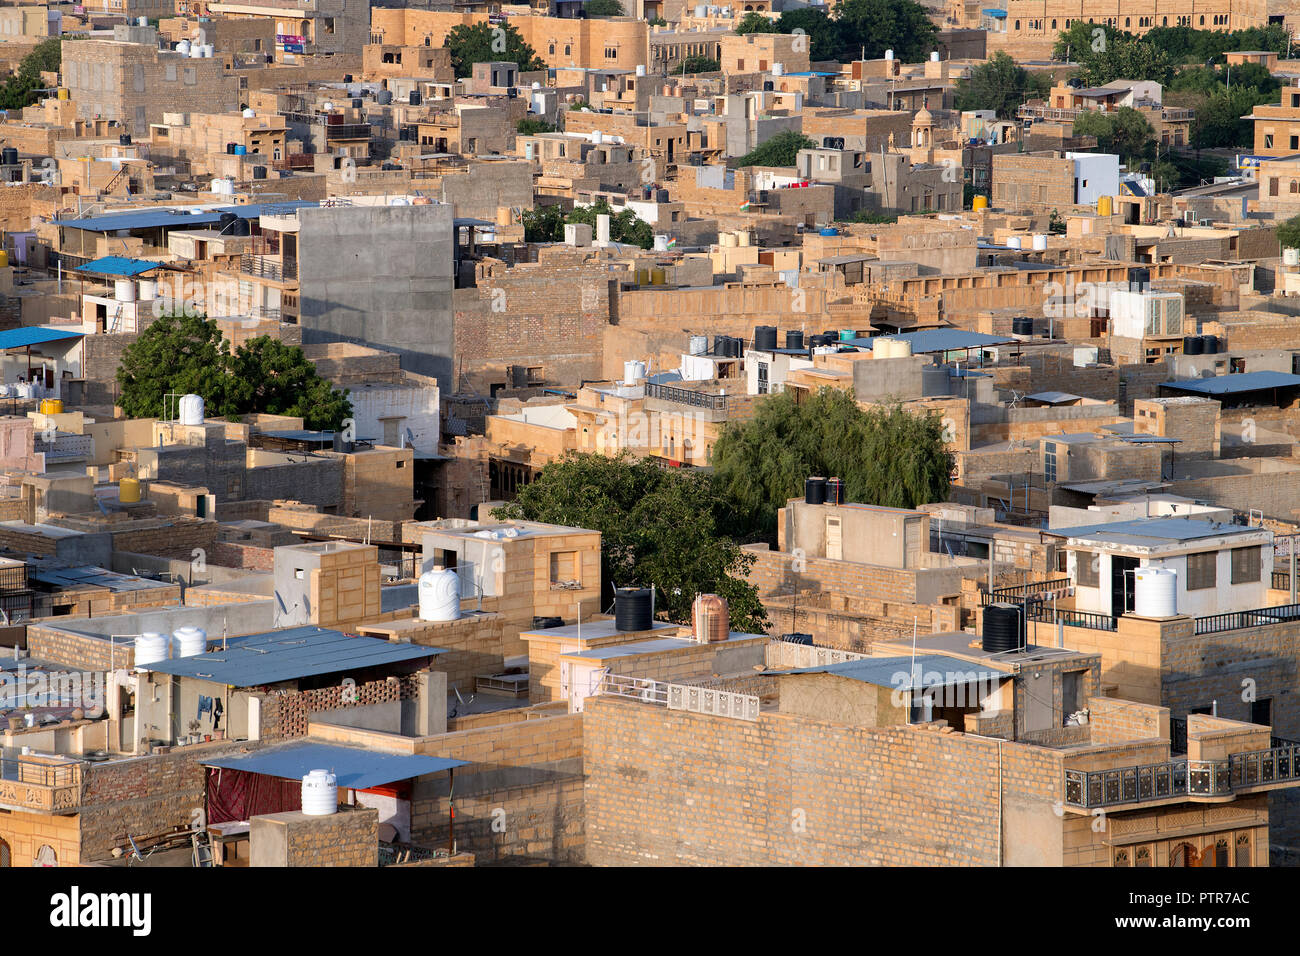 The image of view of Golden houses of jaisalmer city,  Jaisalmer, Rajasthan, India Stock Photo